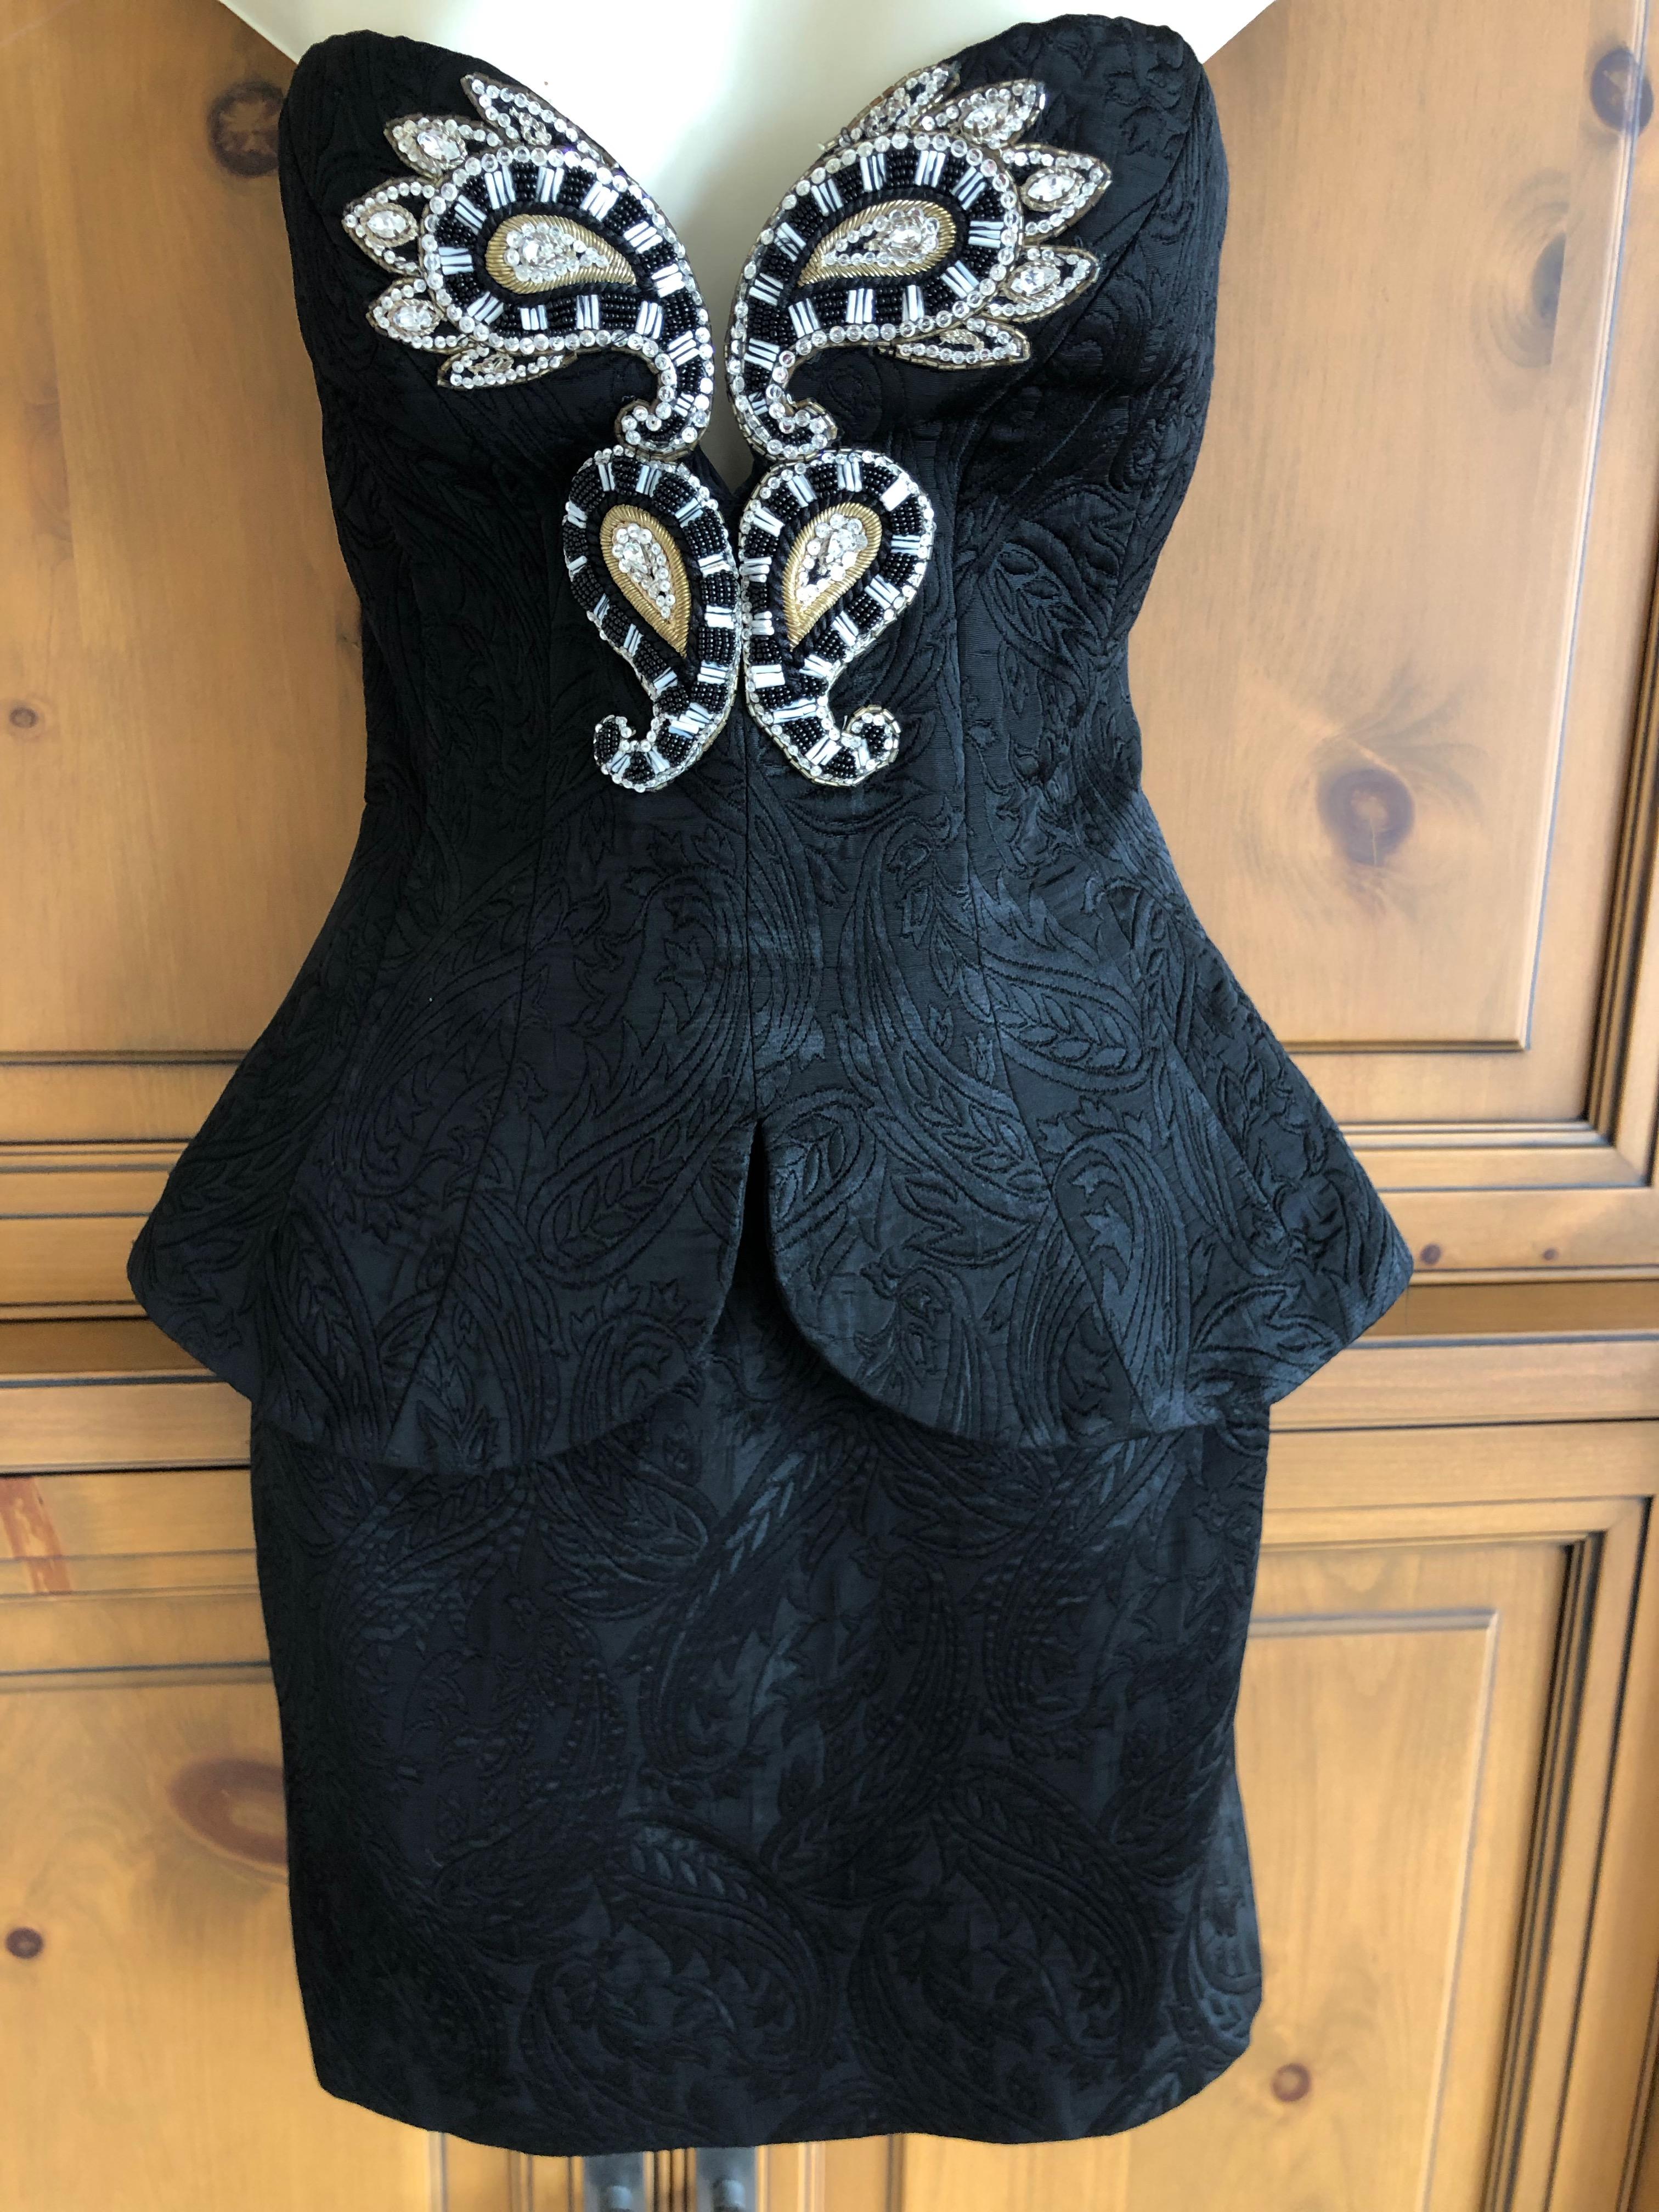 Bob Mackie Vintage 1980's Black Brocade Bustier Dress with Full Corset.
This is a full corset with skirt attached, a corset dress.
Marked size 10, but the hips are so small I could not get it on to my mannequin, so more like a size 4 in my